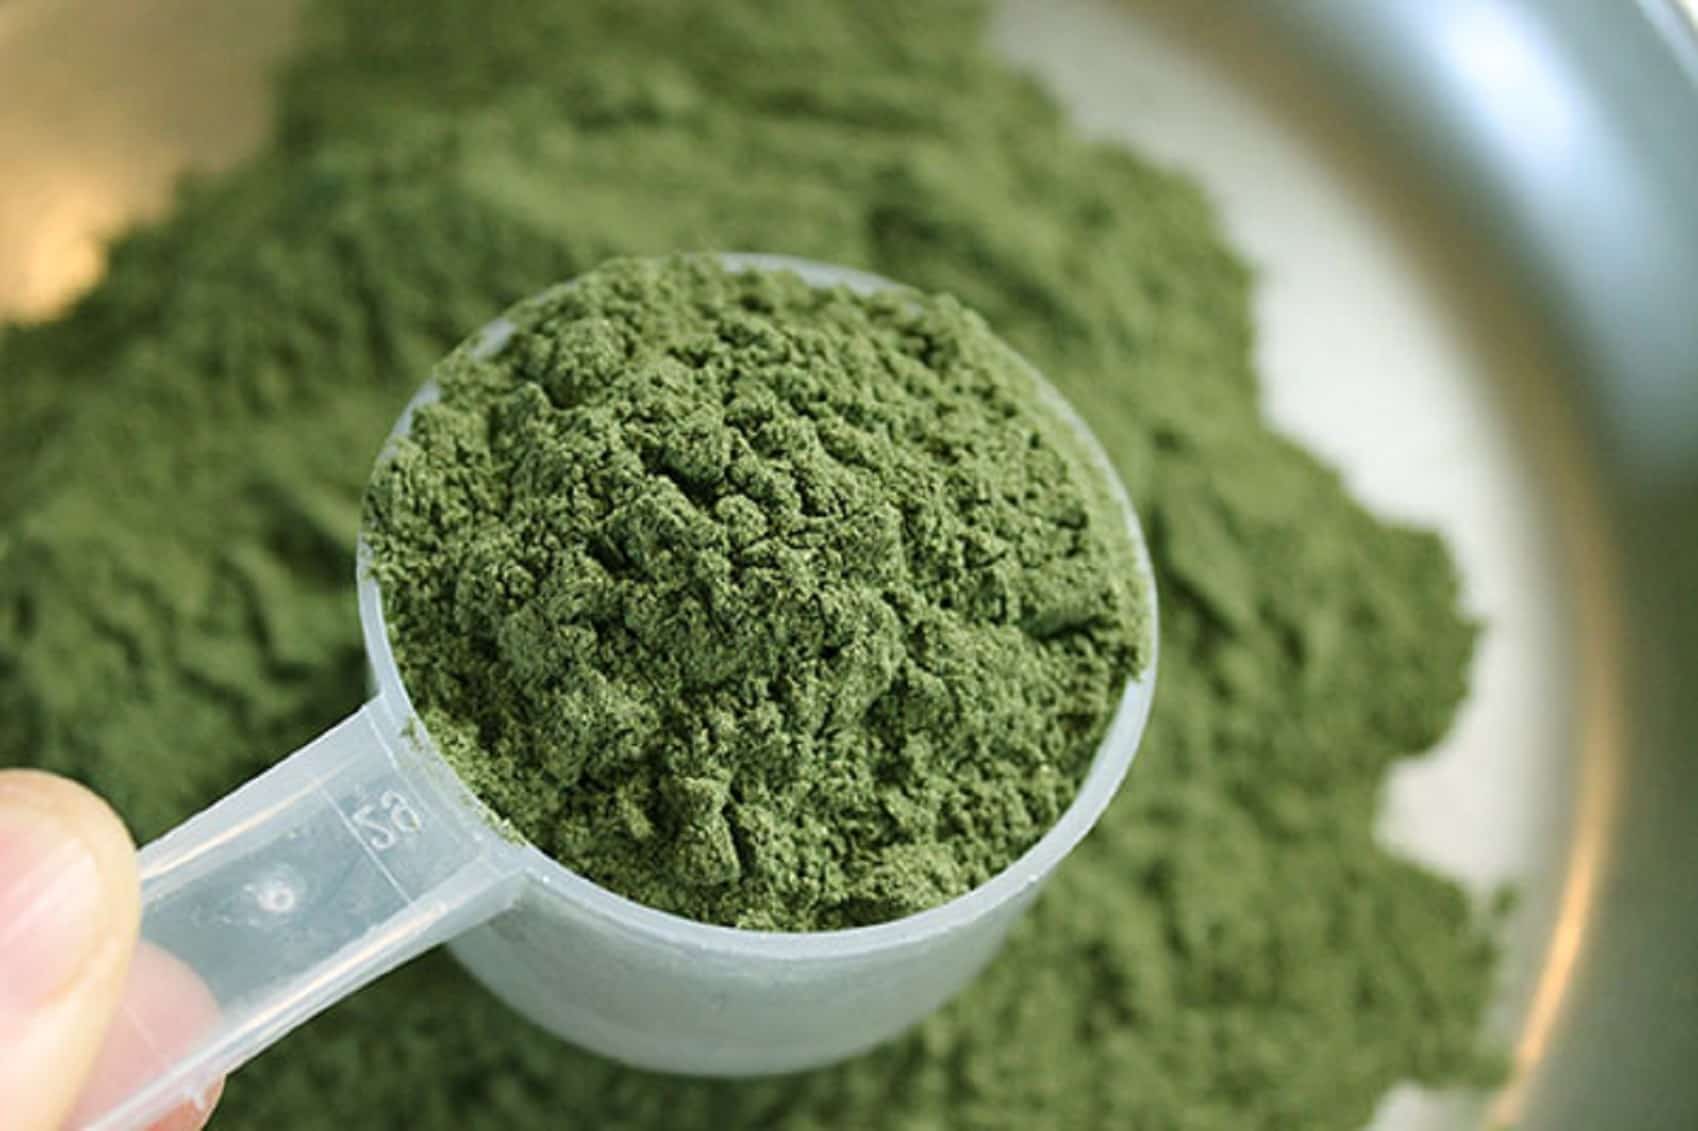 Green Malay Kratom Enhance Your Wellbeing Naturally